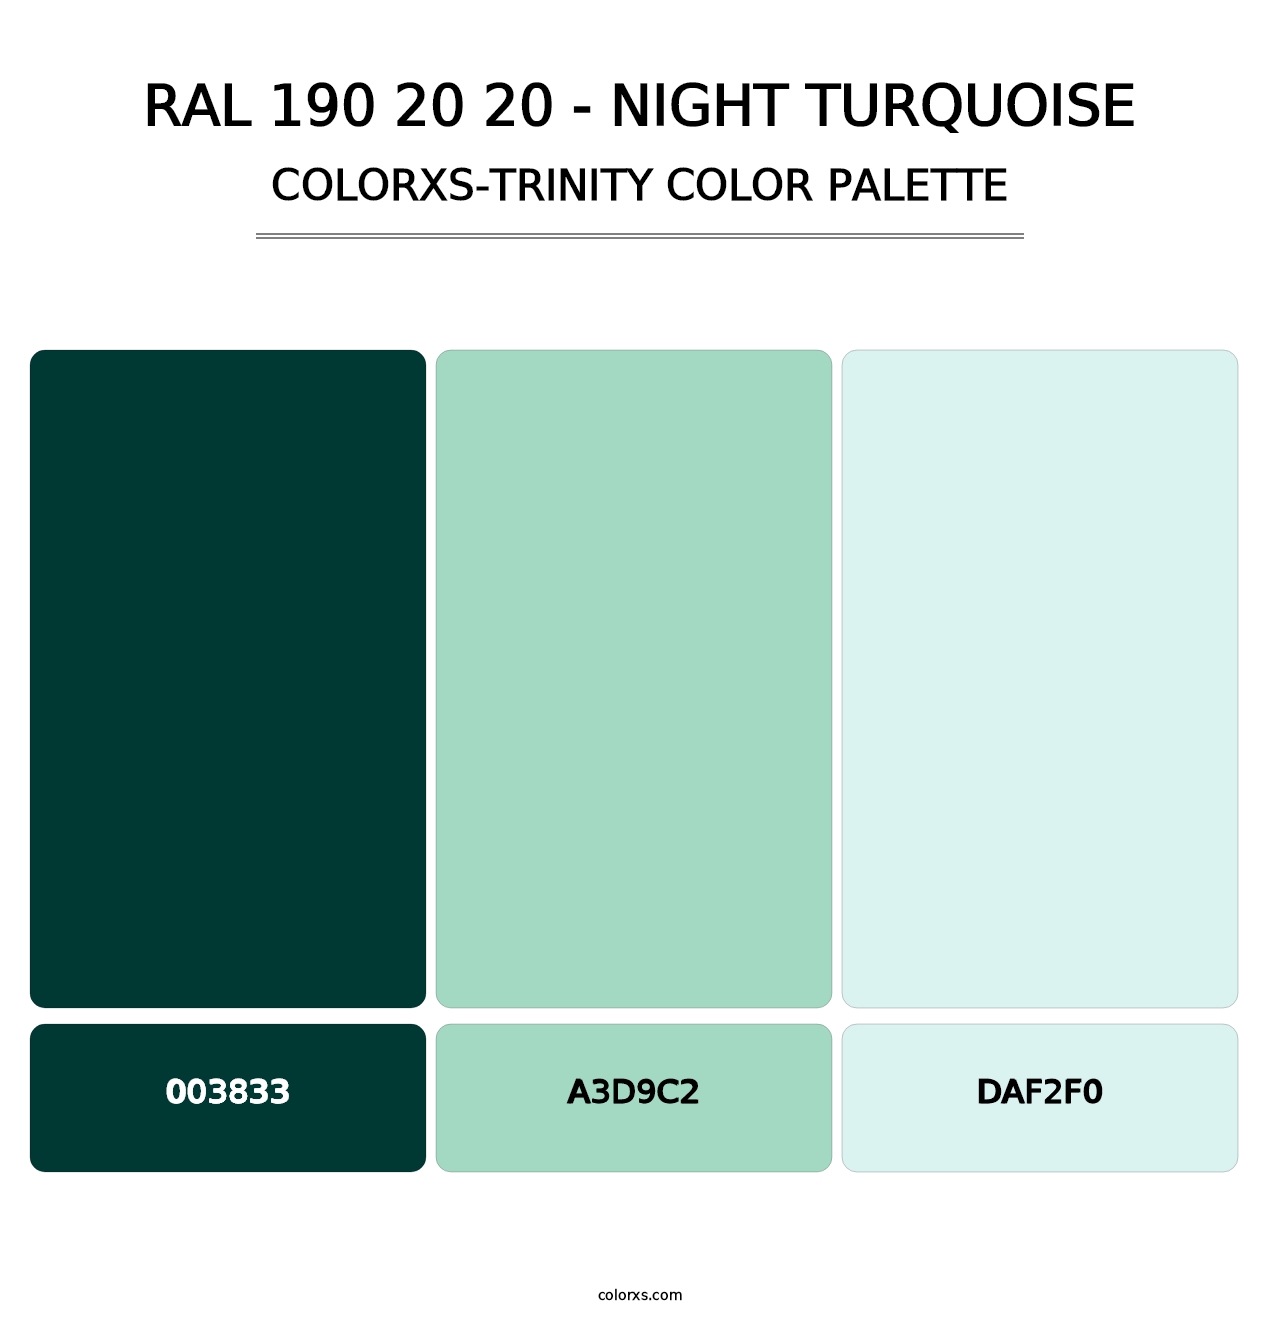 RAL 190 20 20 - Night Turquoise - Colorxs Trinity Palette